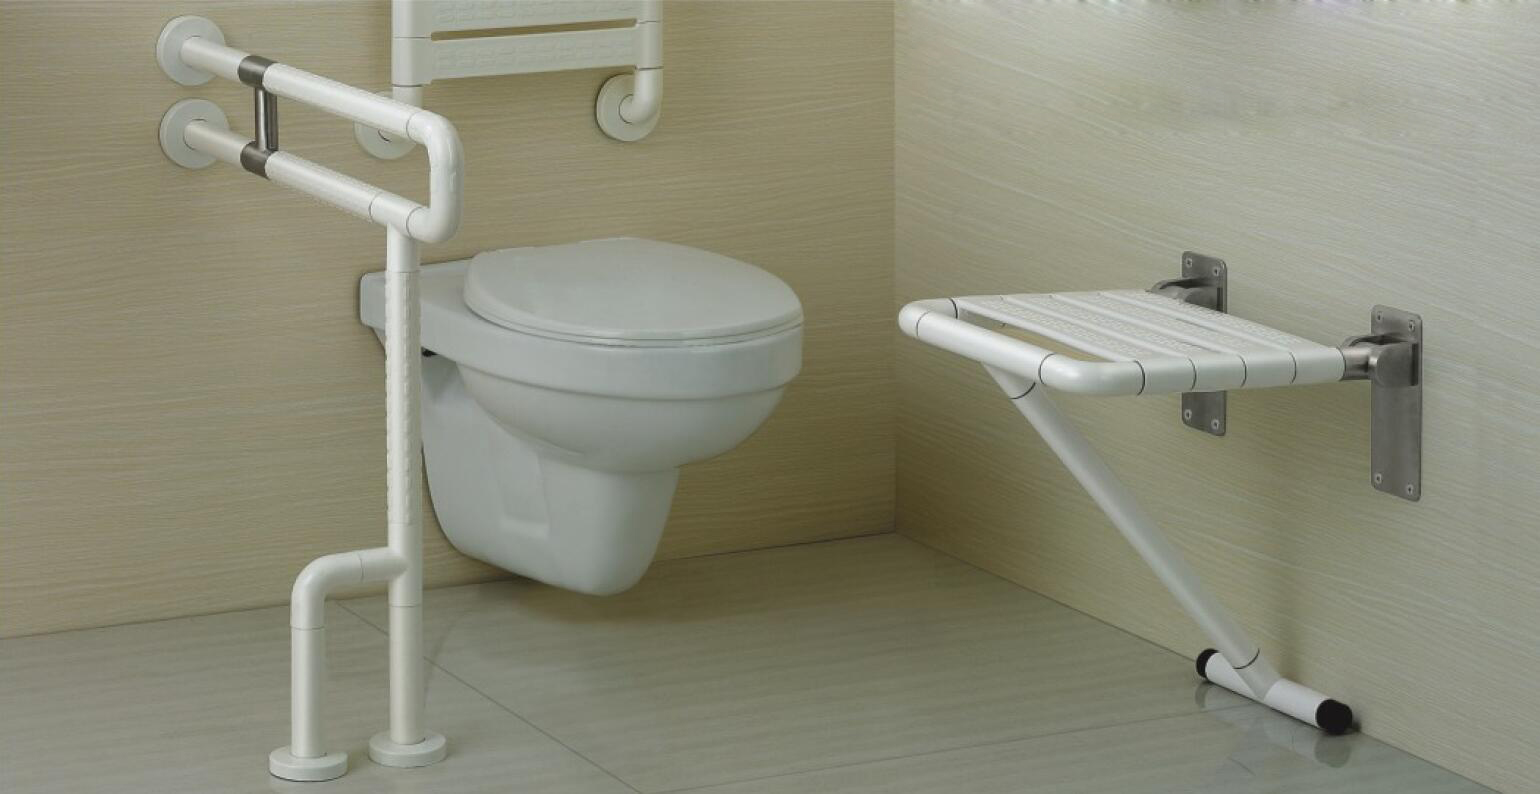 What Are The Reasons for The Popularity of Wall-Hung Toilets?